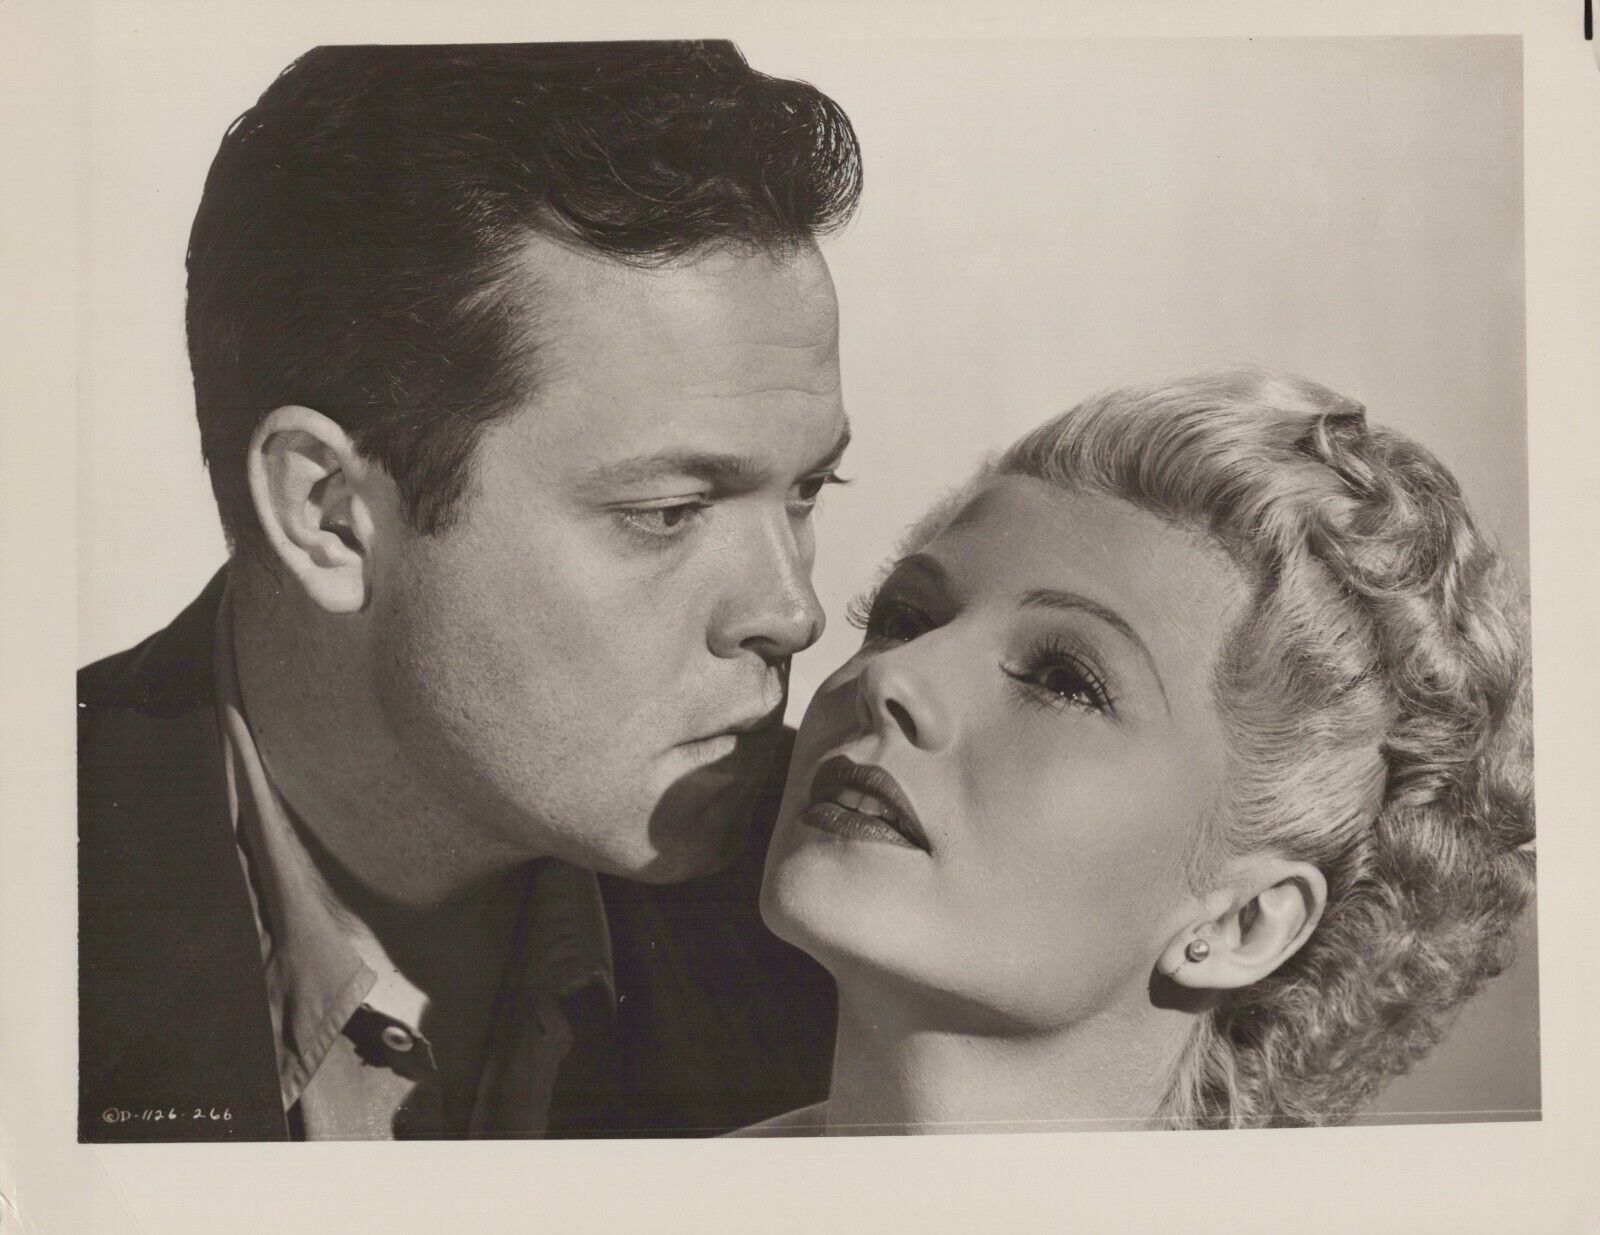 Rita Hayworth + Orson Welles in The Lady from Shanghai (1948) ❤ Photo K 396